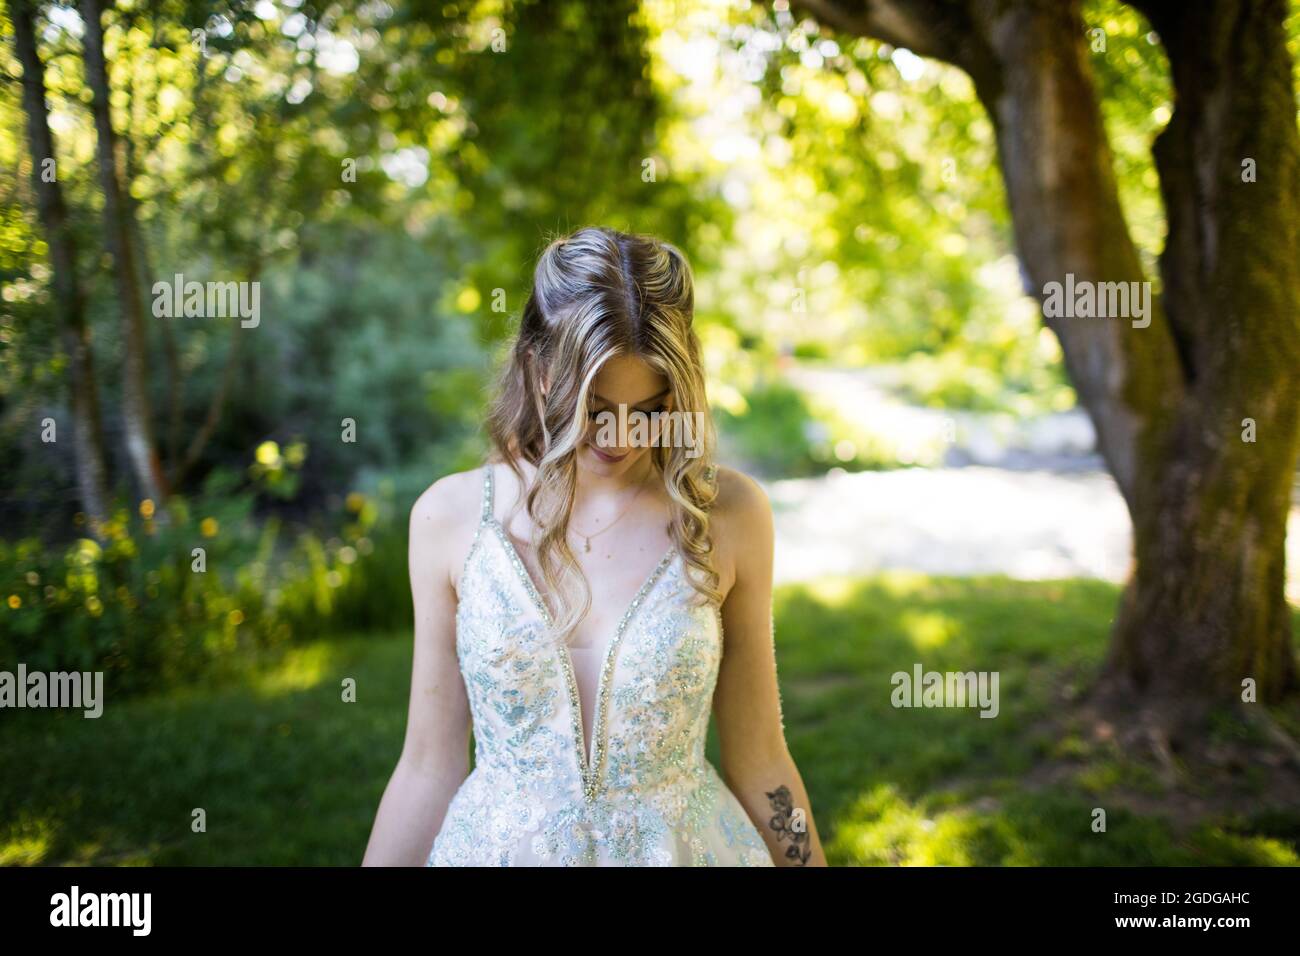 Portrait of attractive young woman looking down in nature. Stock Photo